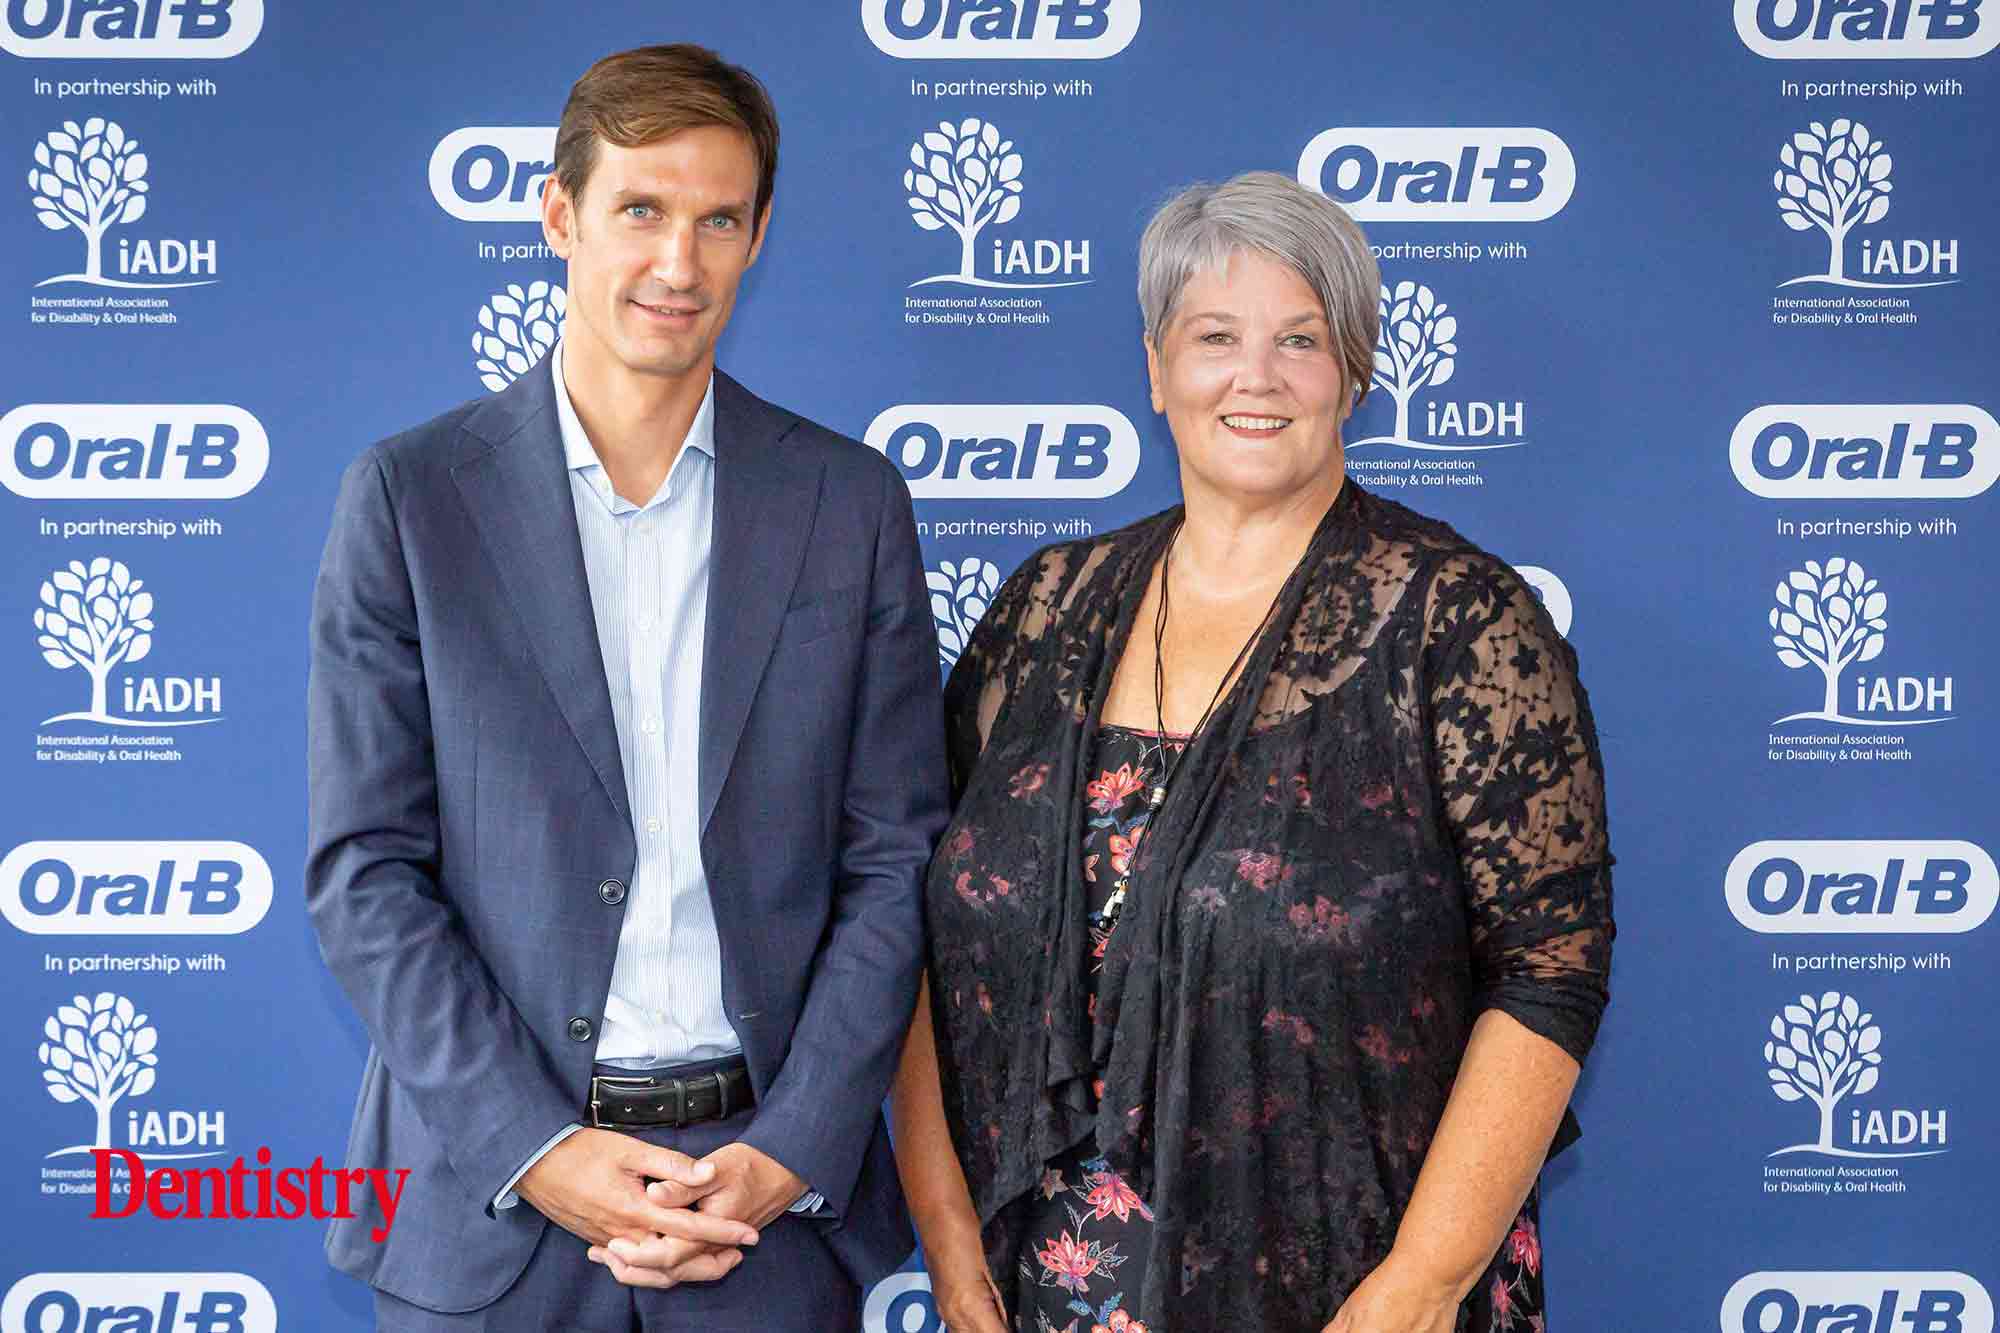 Oral-B announce partnership with International Association of Disability and Oral Health